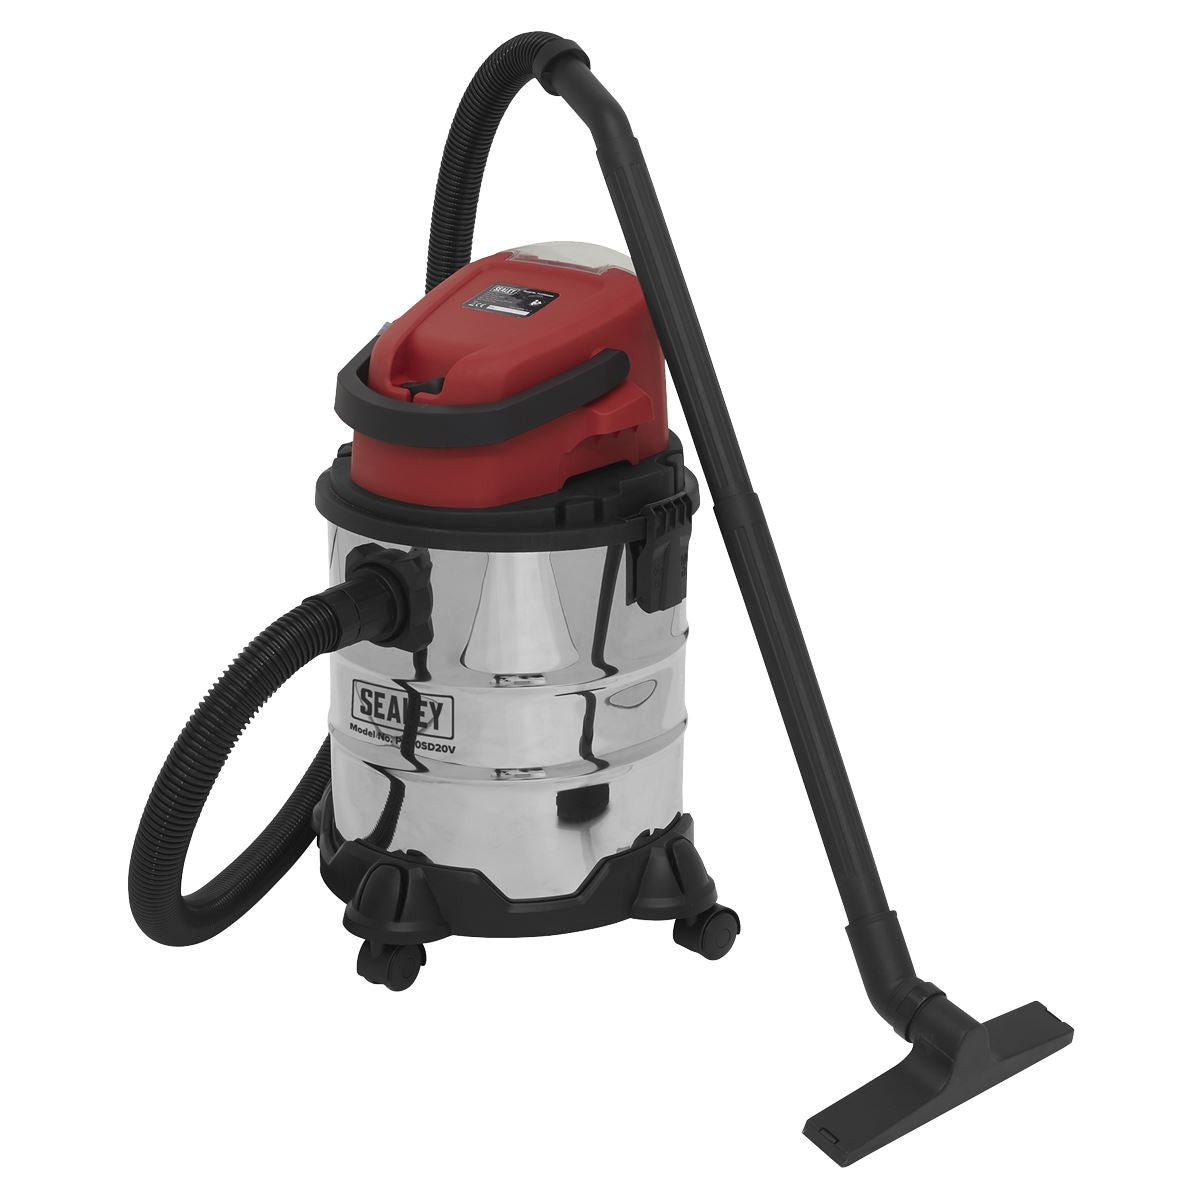 Sealey 20V Cordless 20L Wet and Dry Vacuum Cleaner Body Only